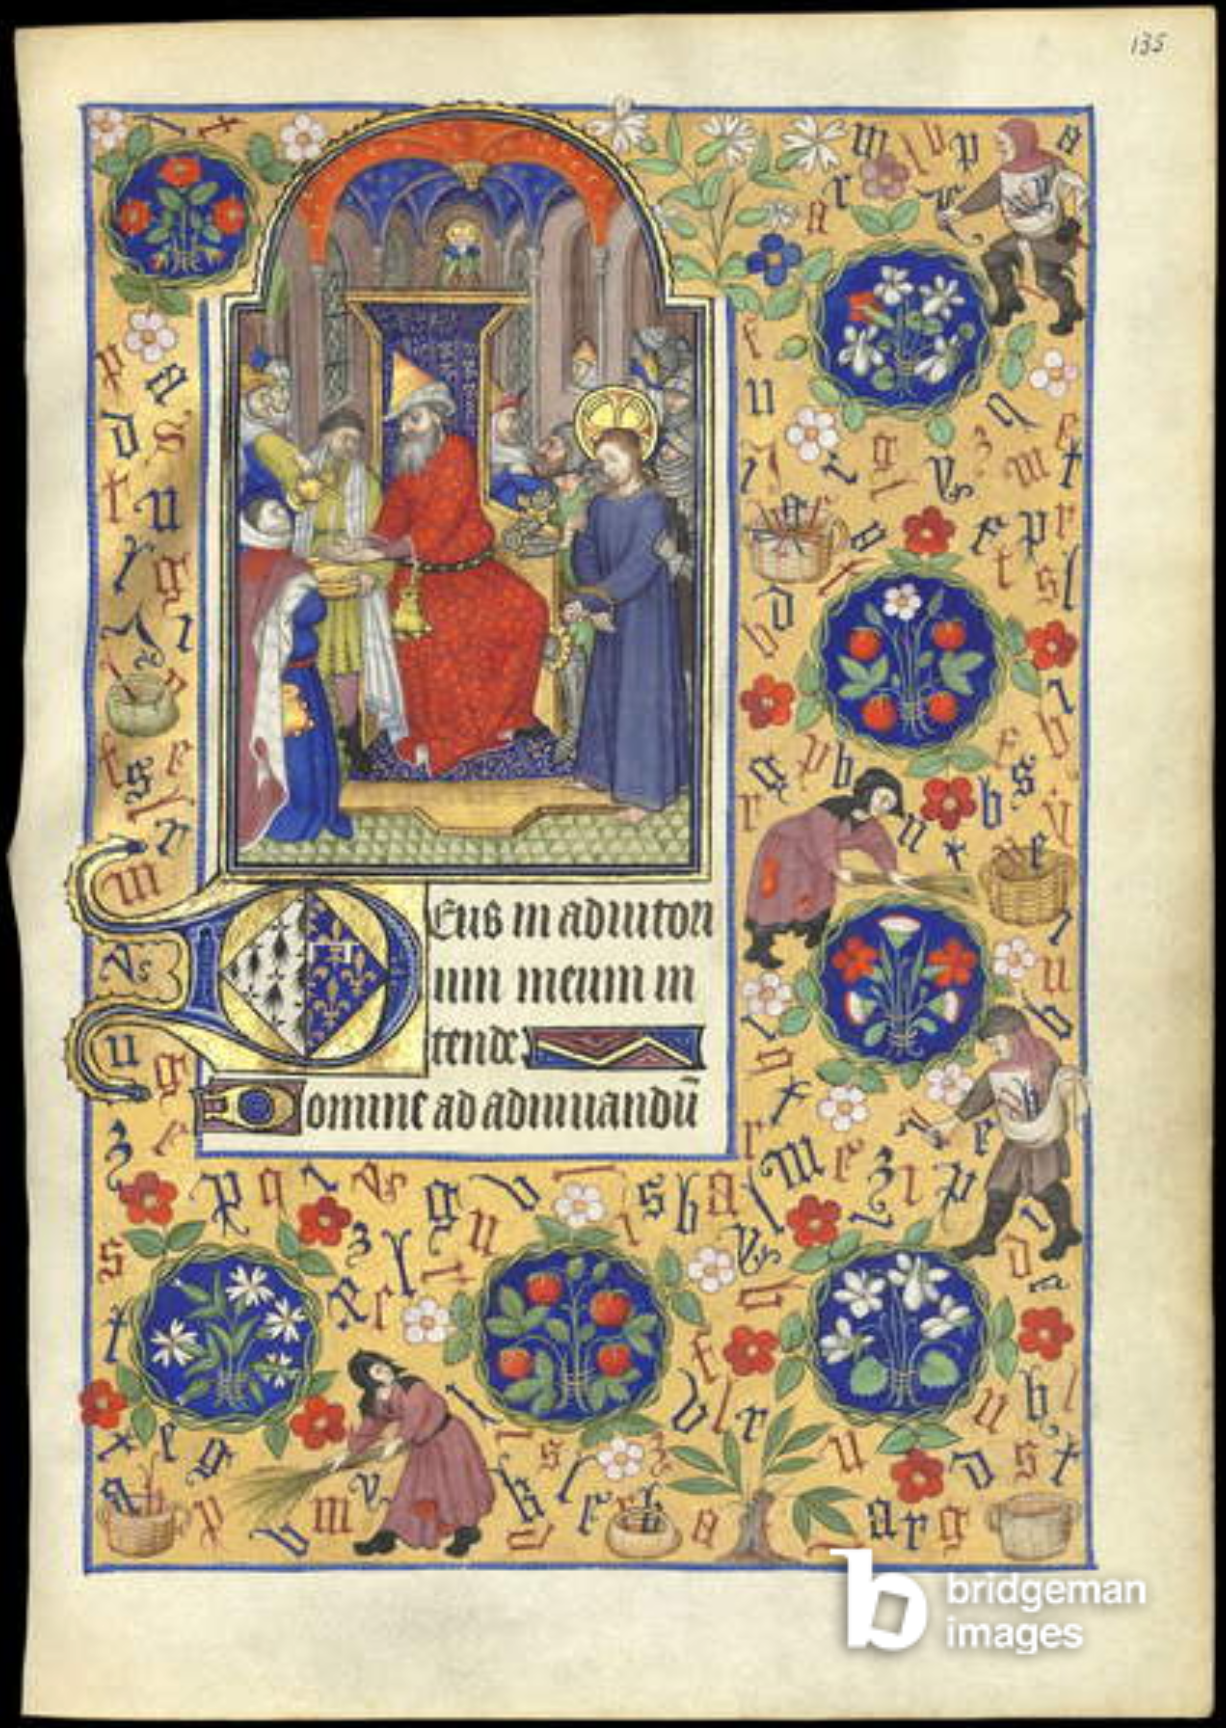 f.135r Miniature of Pilate washing his hands of the fate of Jesus, from the 'Book of Hours of Marguerite d'Orléans', 1426-59 (vellum), French School, (15th century) / Bibliothèque Nationale, Paris, France / Bridgeman Images